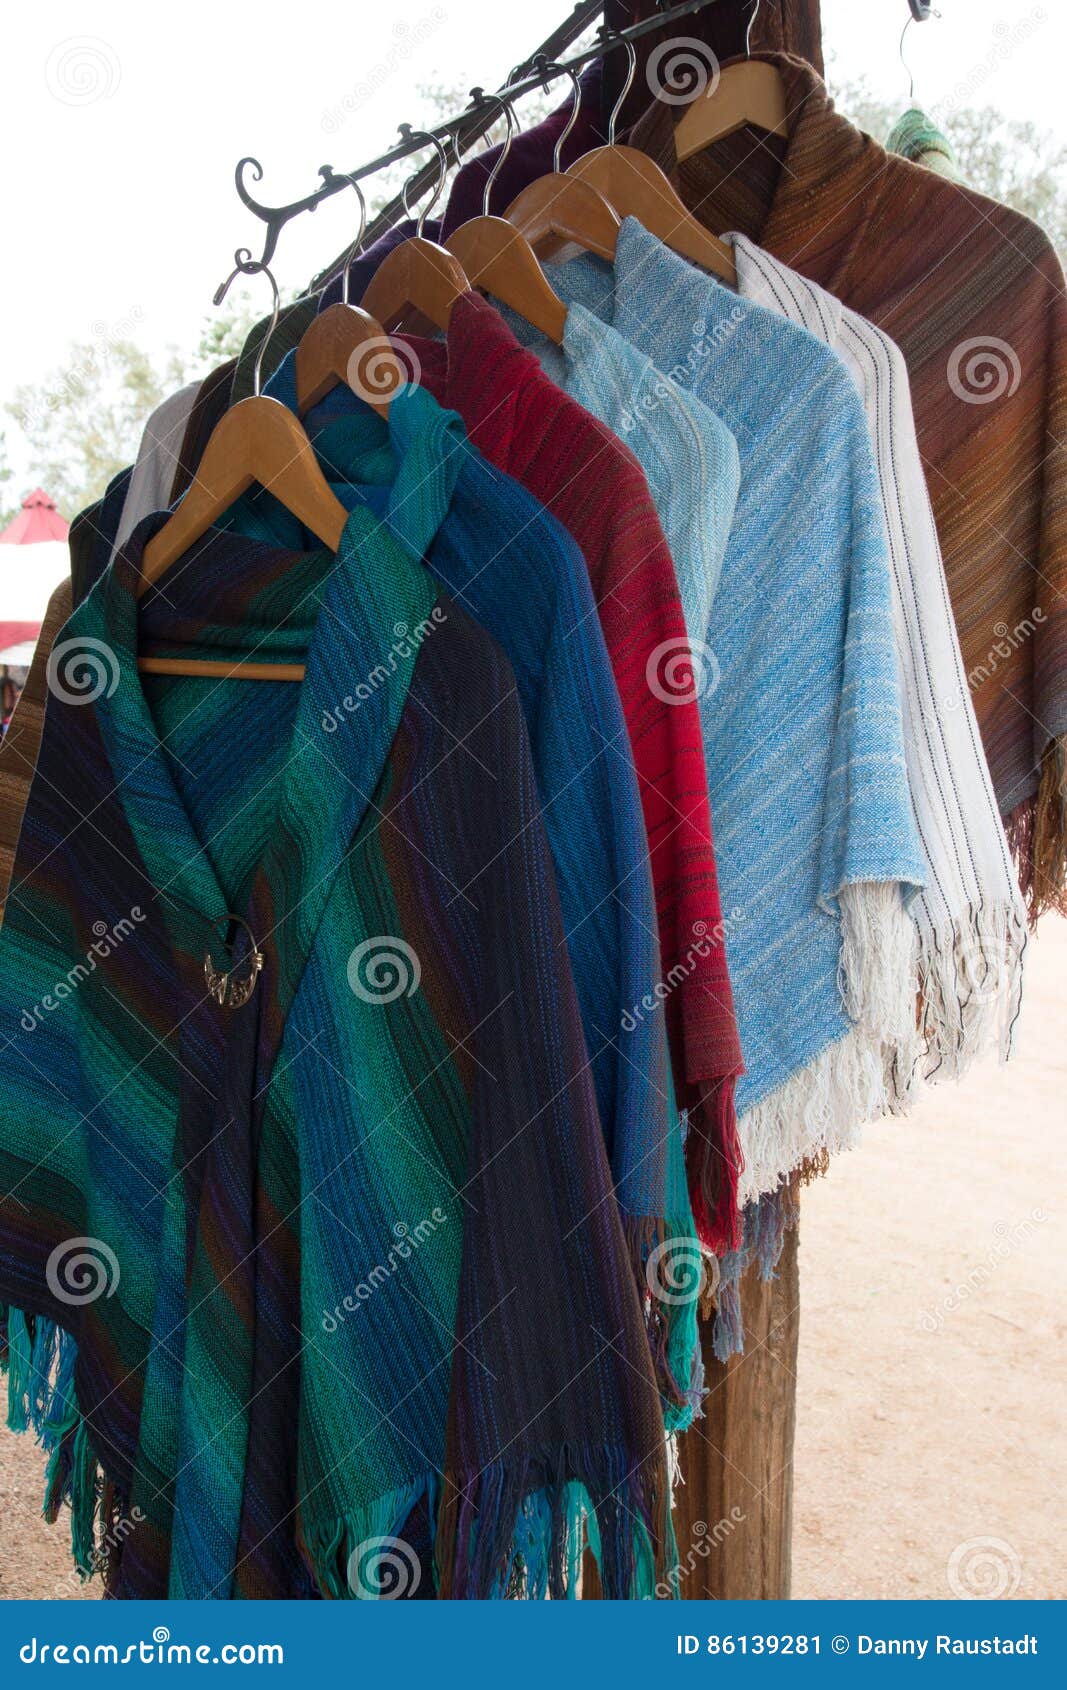 Fine Handmade Linen Clothing at Fashion Boutique Stock Image - Image of ...